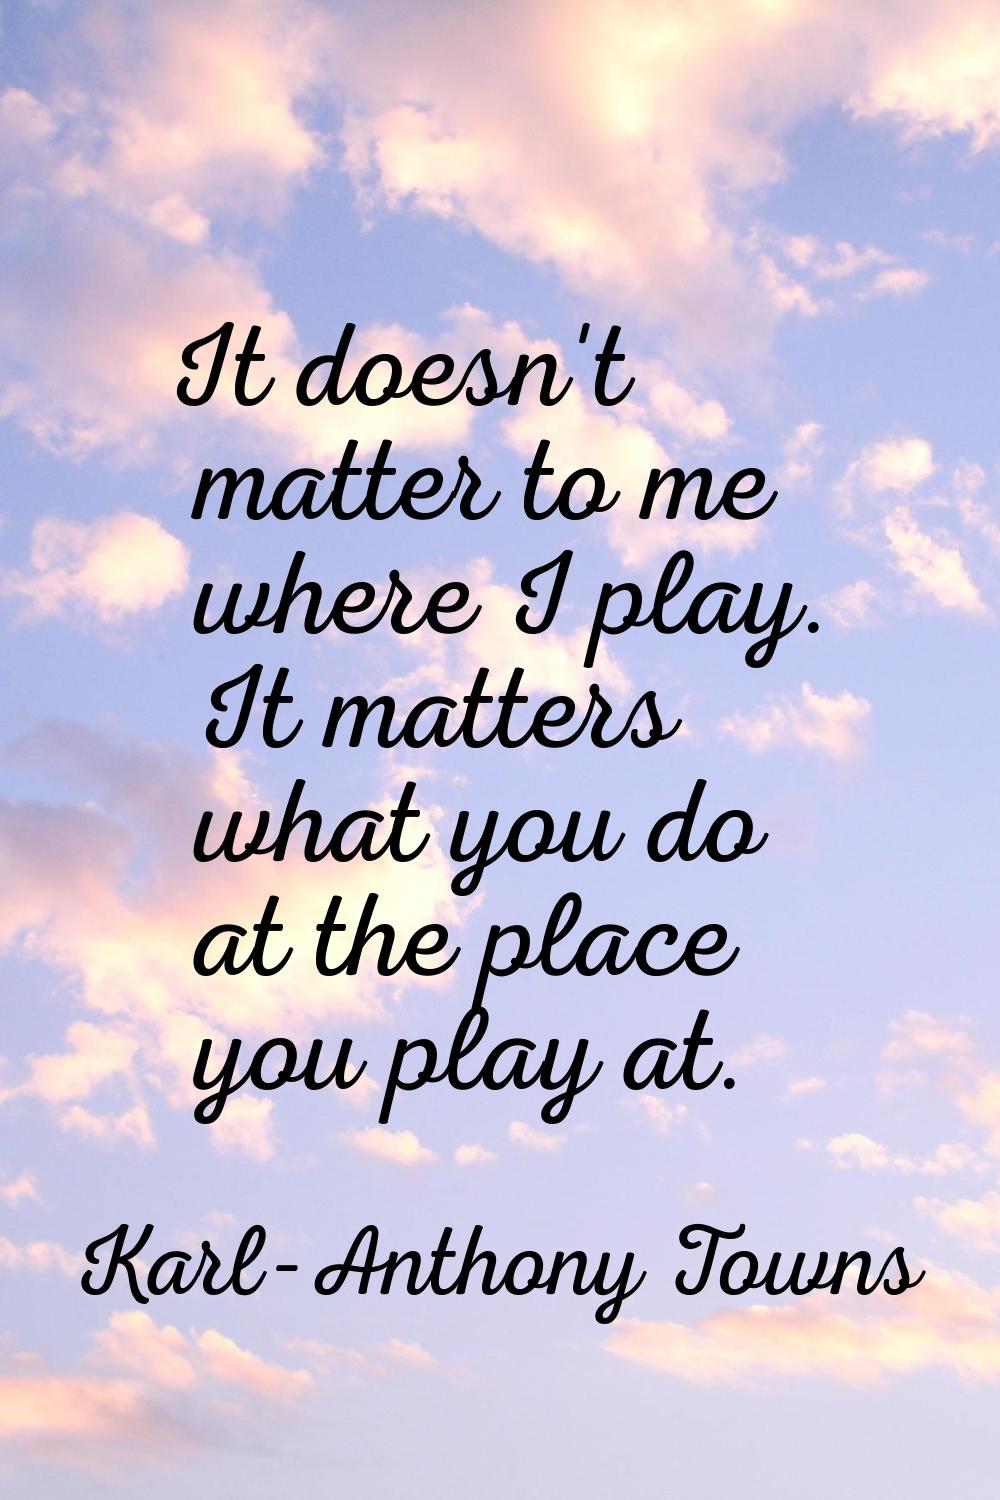 It doesn't matter to me where I play. It matters what you do at the place you play at.